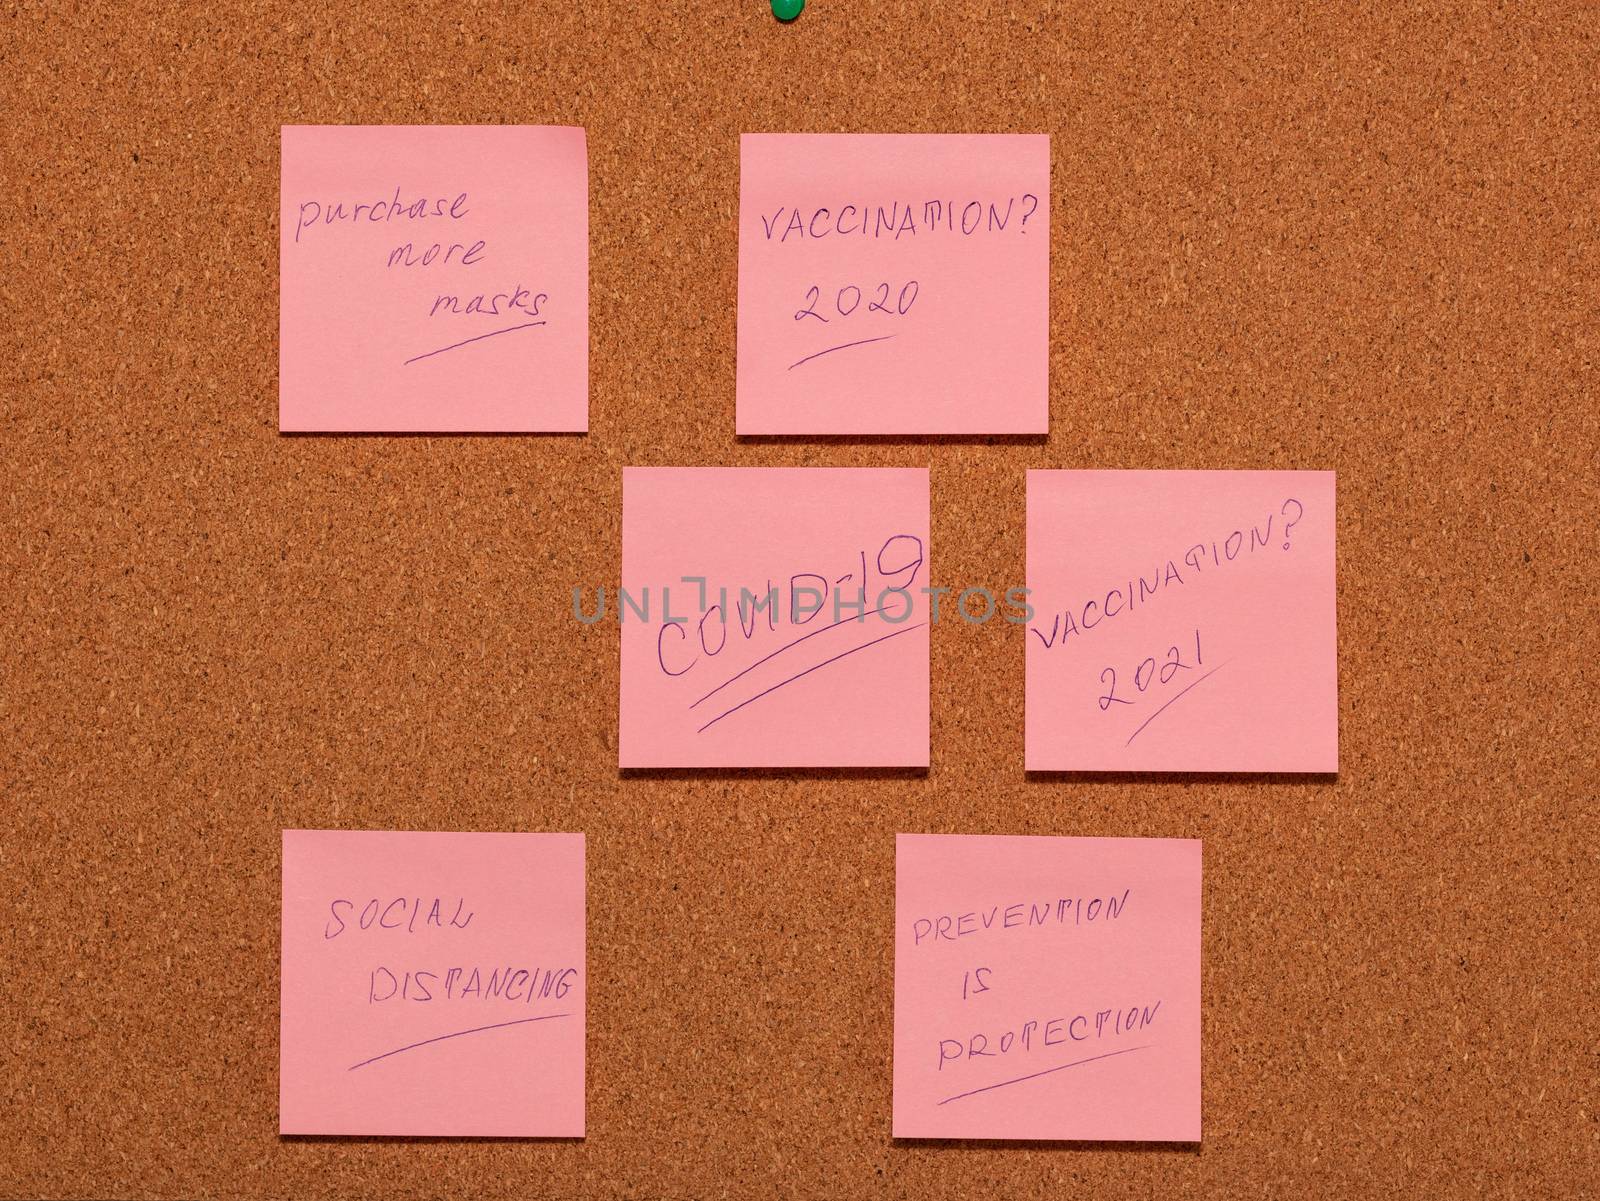 Vaccination 2021?, Vaccination 2020?, Purchase more masks, Social Distancing, Prevention is Protection, Covid-19 words handwritten on six pink stickers across a cork notice-board by DamantisZ